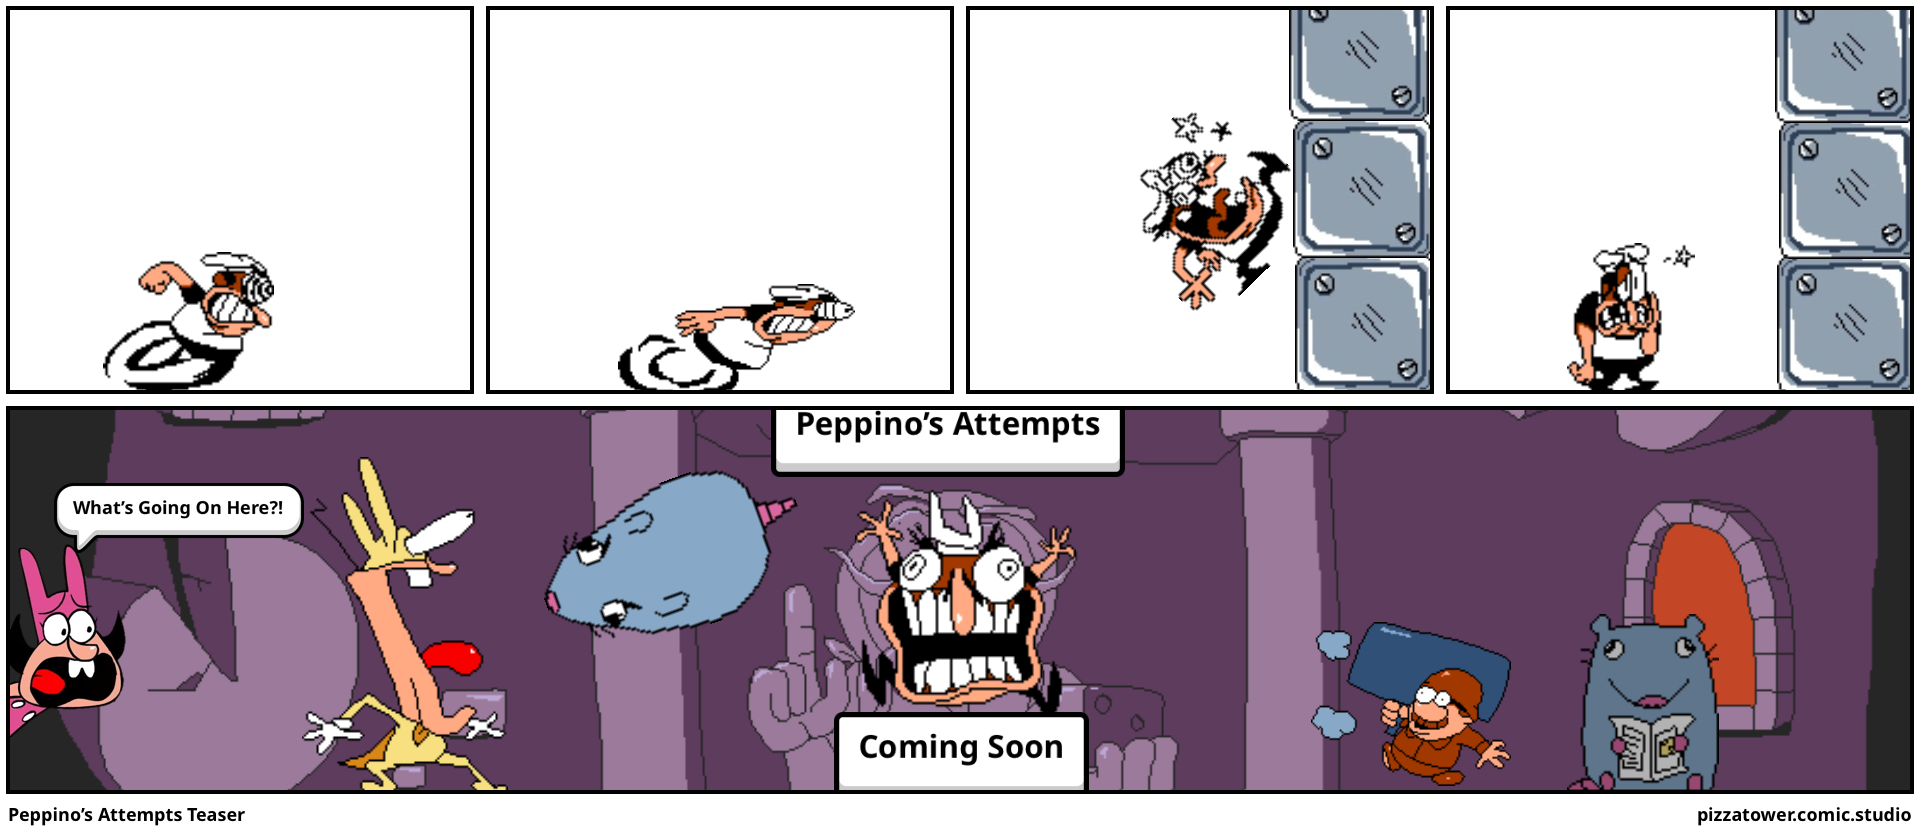 Peppino’s Attempts Teaser